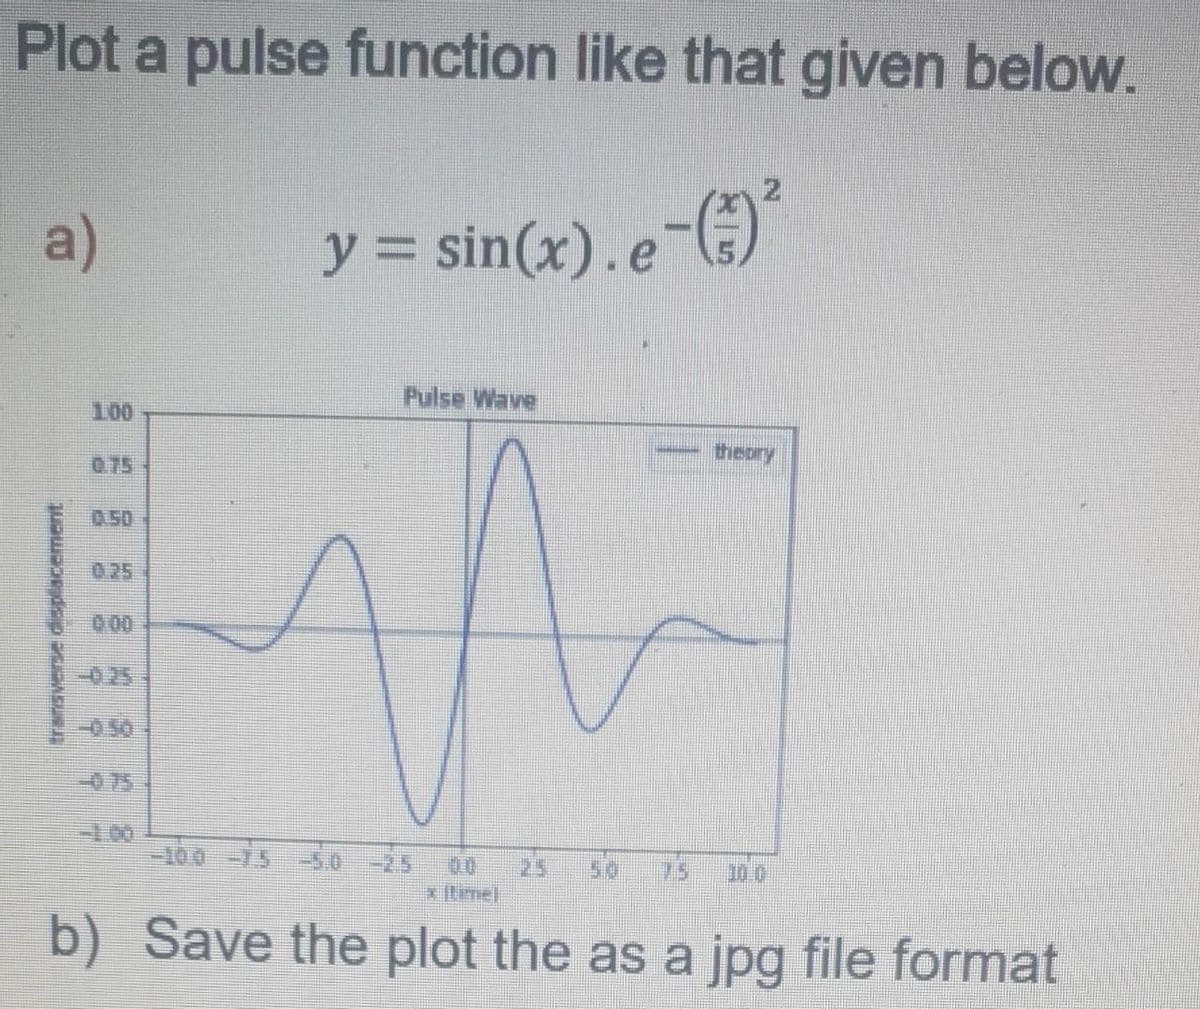 Plot a pulse function like that given below.
a)
y = sin(x).e¯;)
Pulse Wave
100
- theory
075
0.50
0.25
00
-025
-075
100
100-15 5.0 -25
25
Rime]
25
00.0
b) Save the plot the as a jpg file format
transverse displacement
